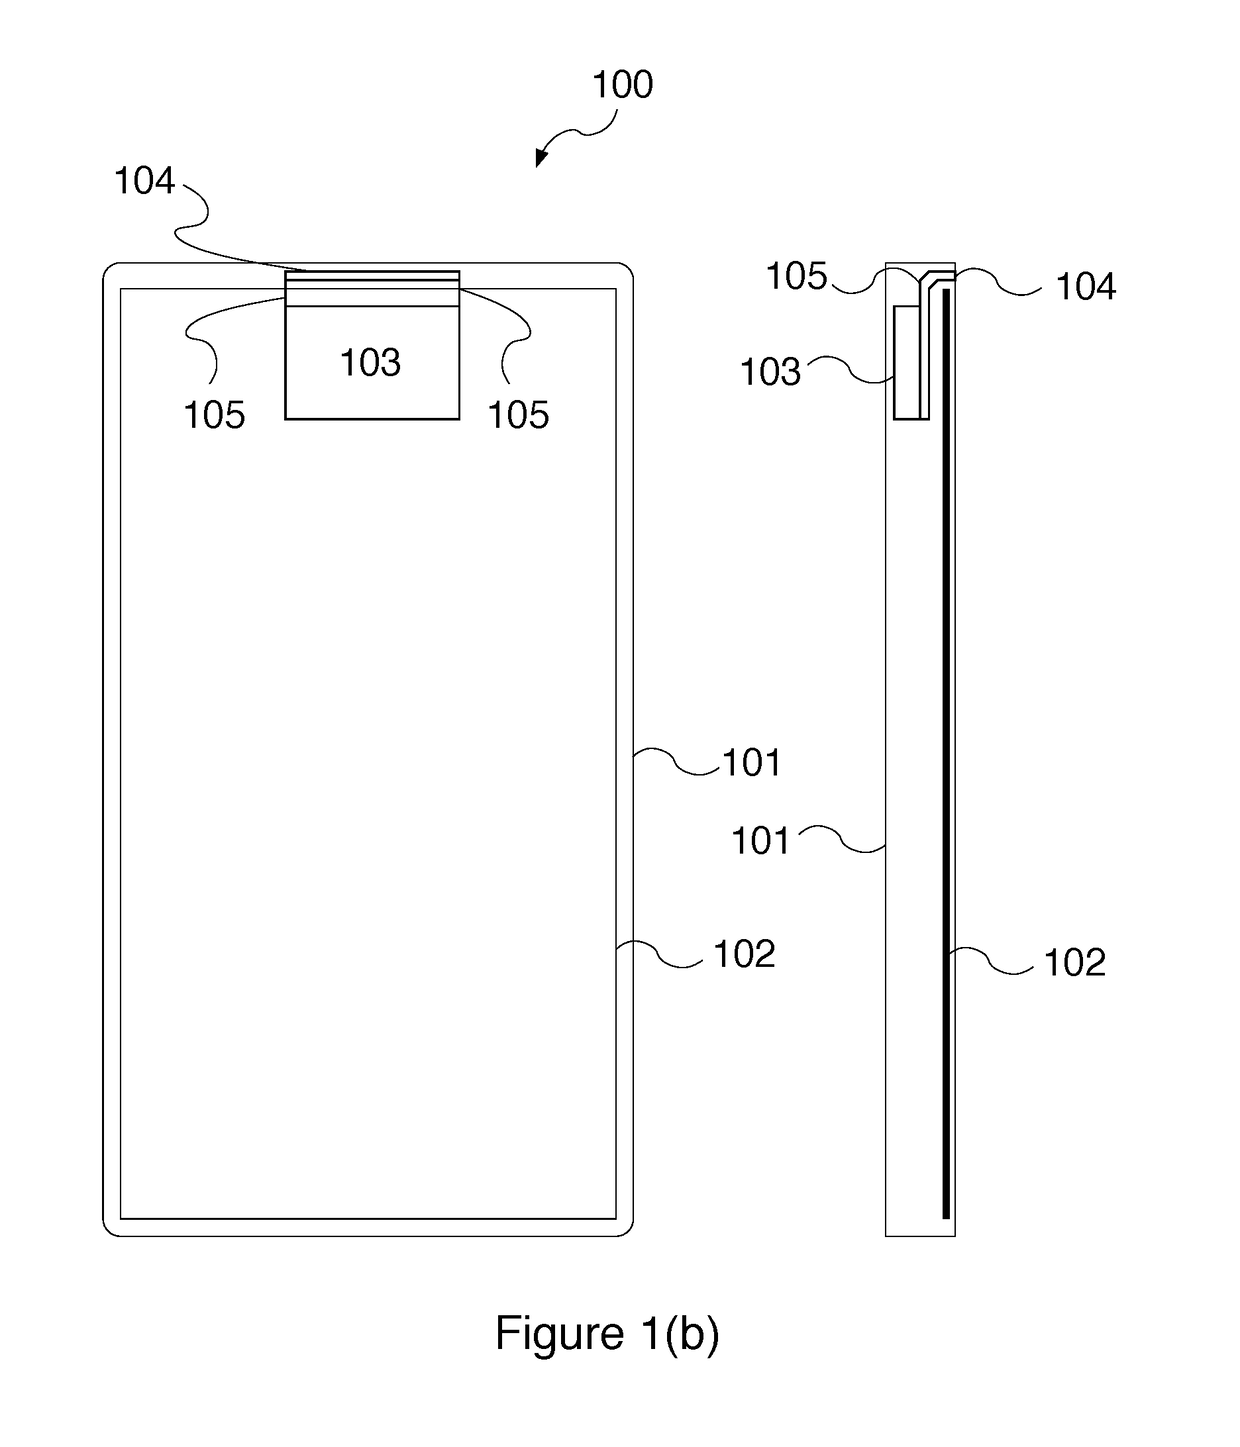 Mobile device with increased screen area